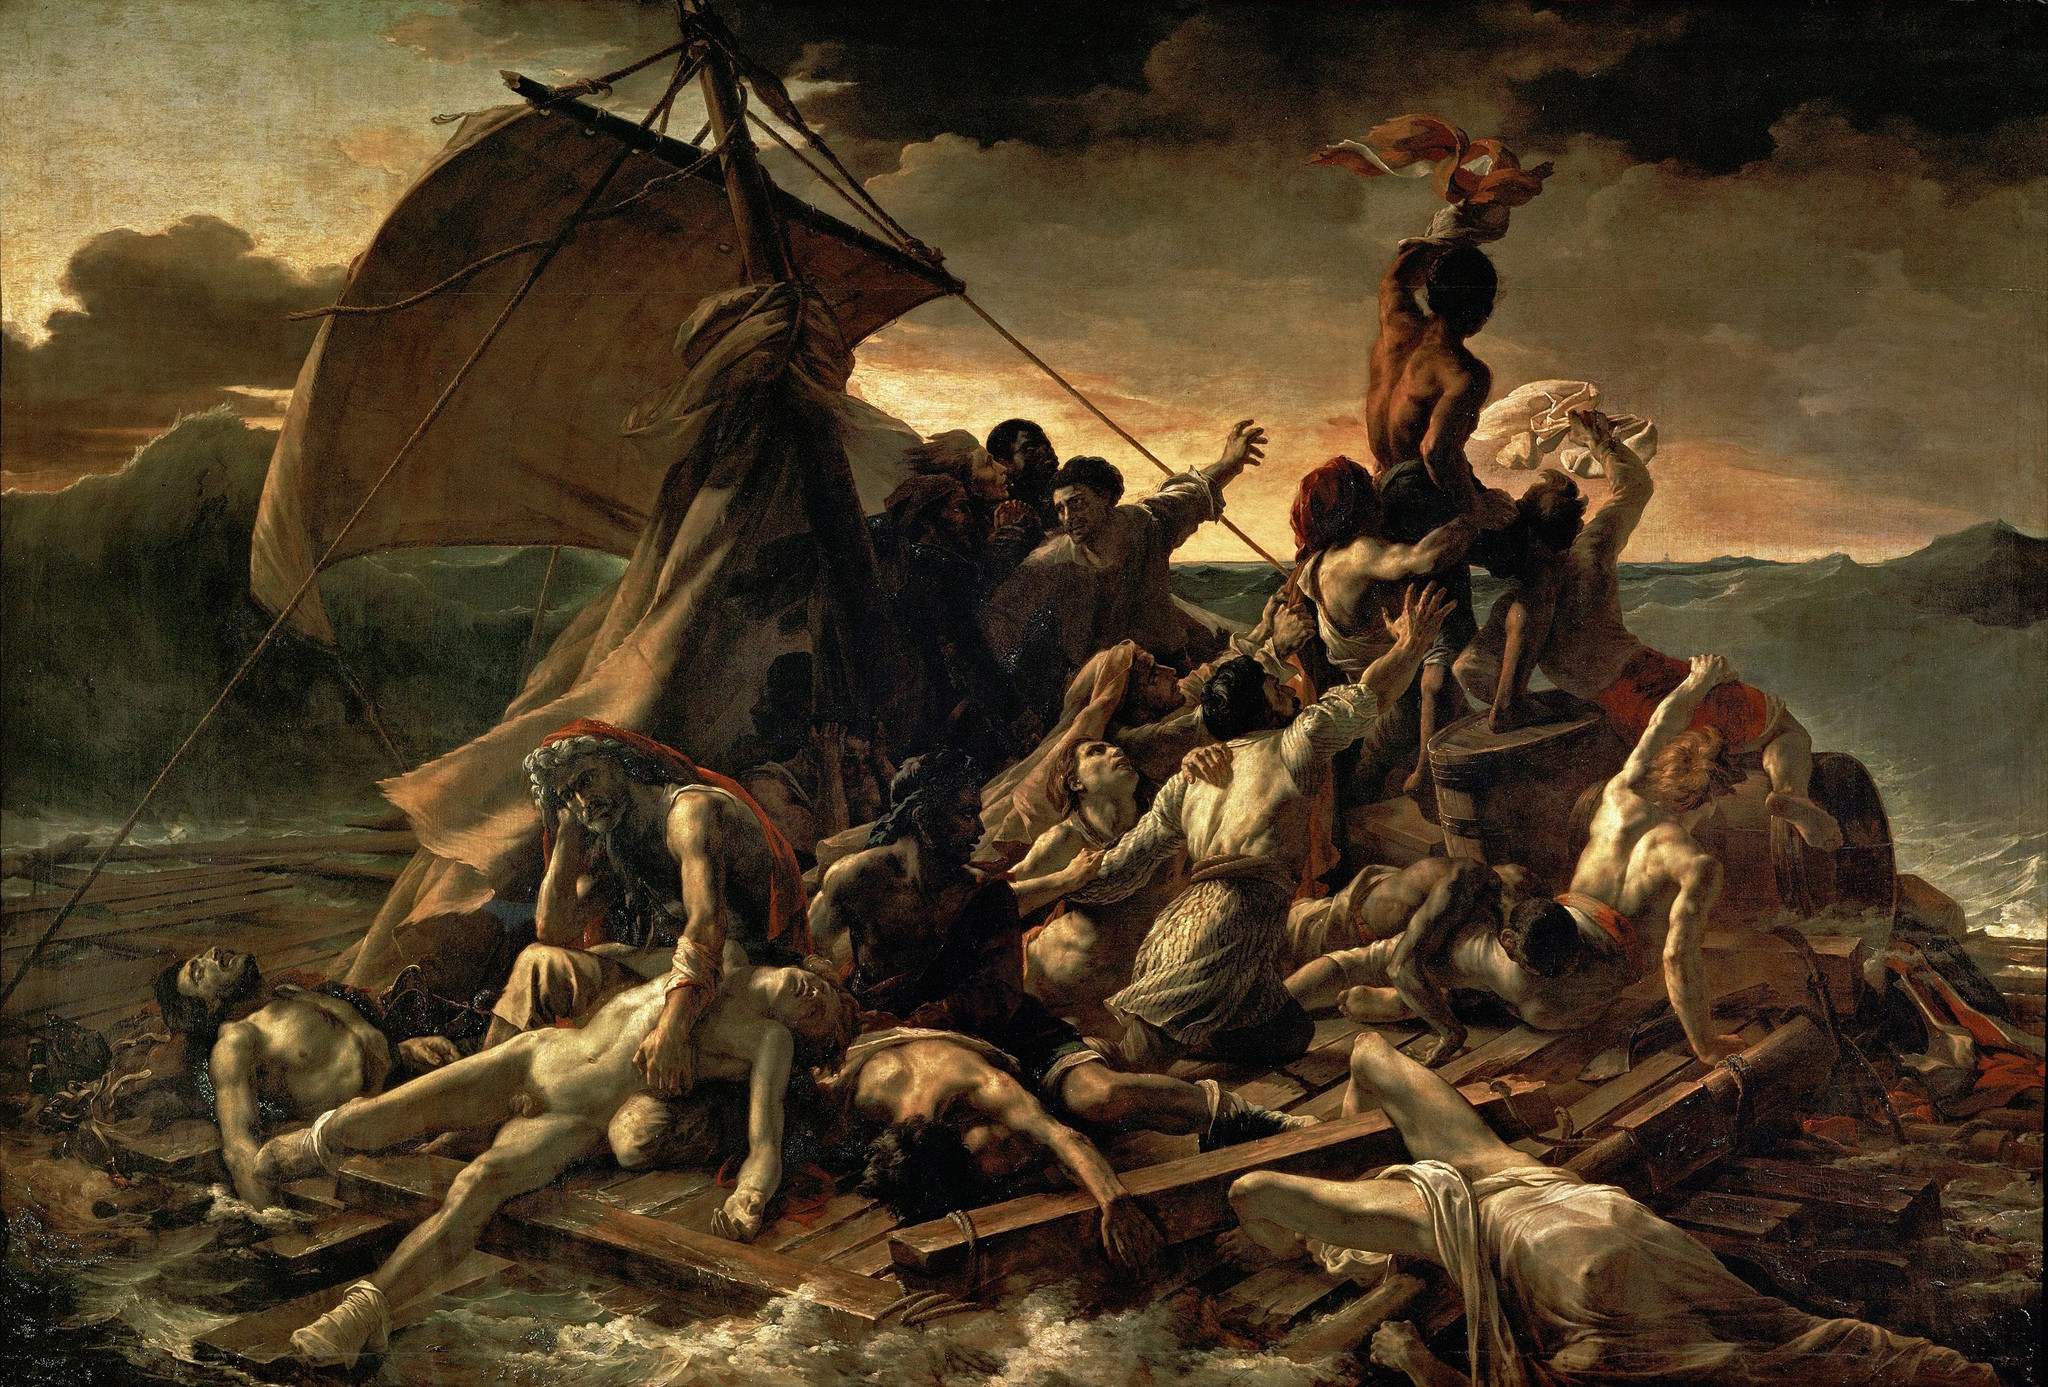 Still using some of Gericault and Orientalists paintings for bodies and colo approach.